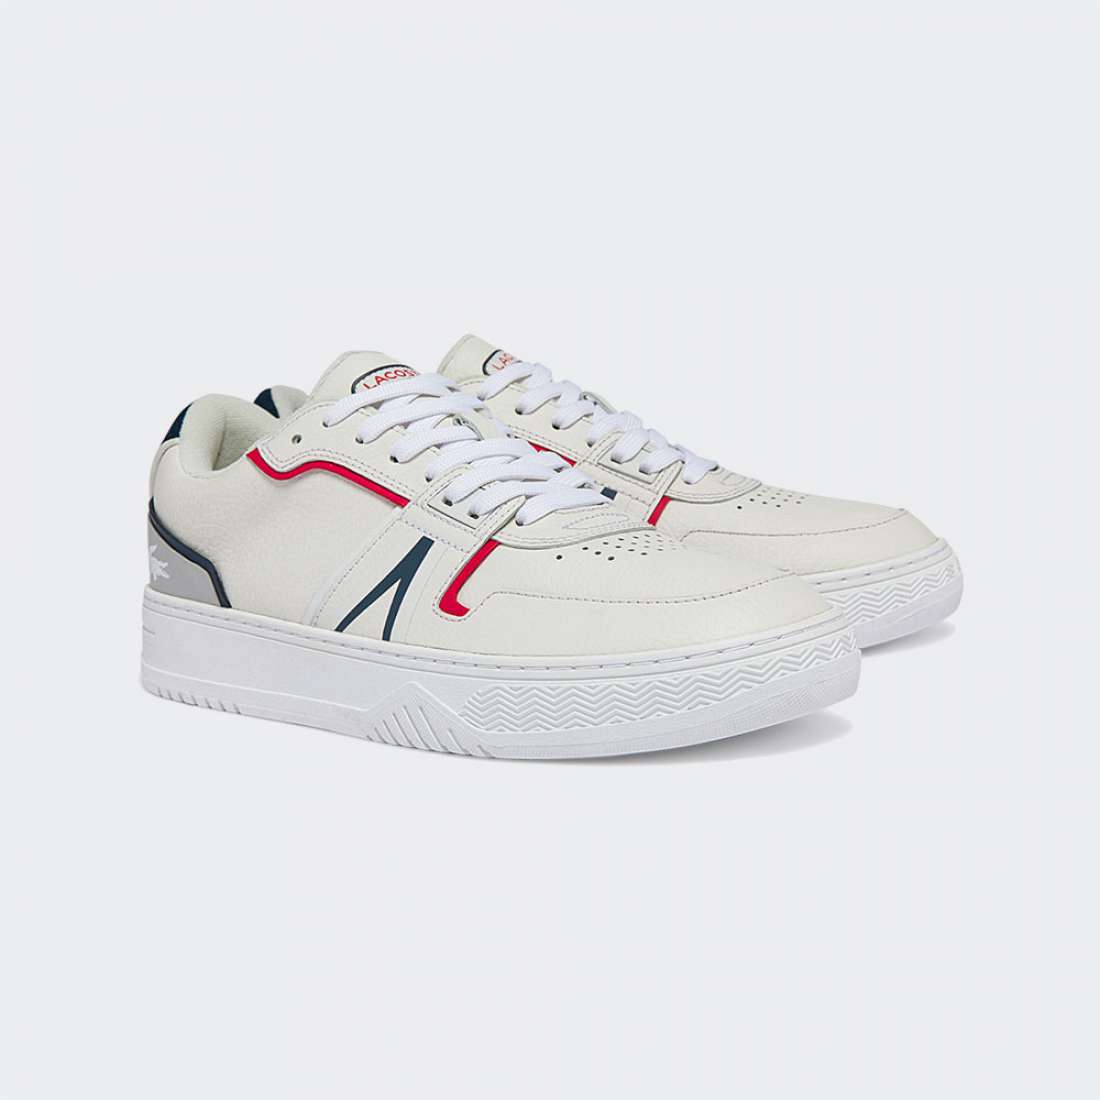 LACOSTE L001 WHT/NAVY/RED